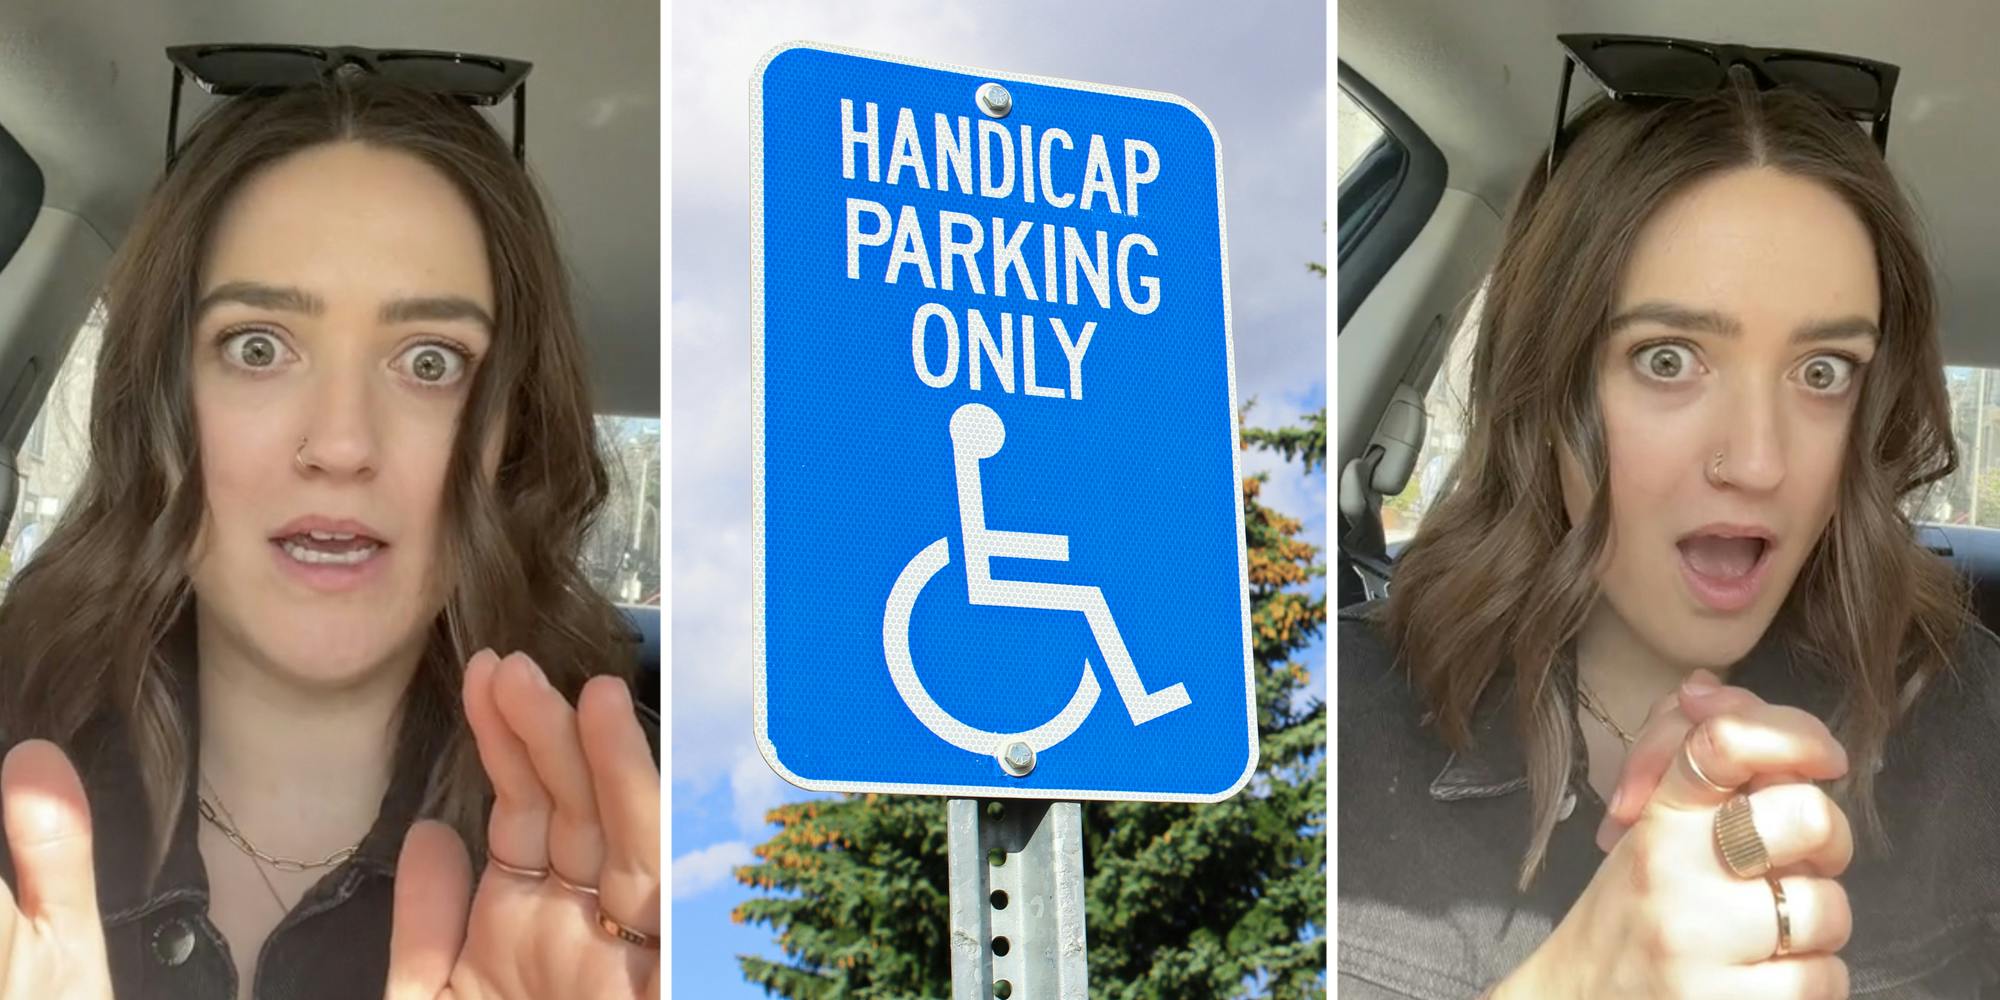 ‘He tells me you look too young to be disabled’: Man criticizes woman for parking in ADA spot—until she shows him why